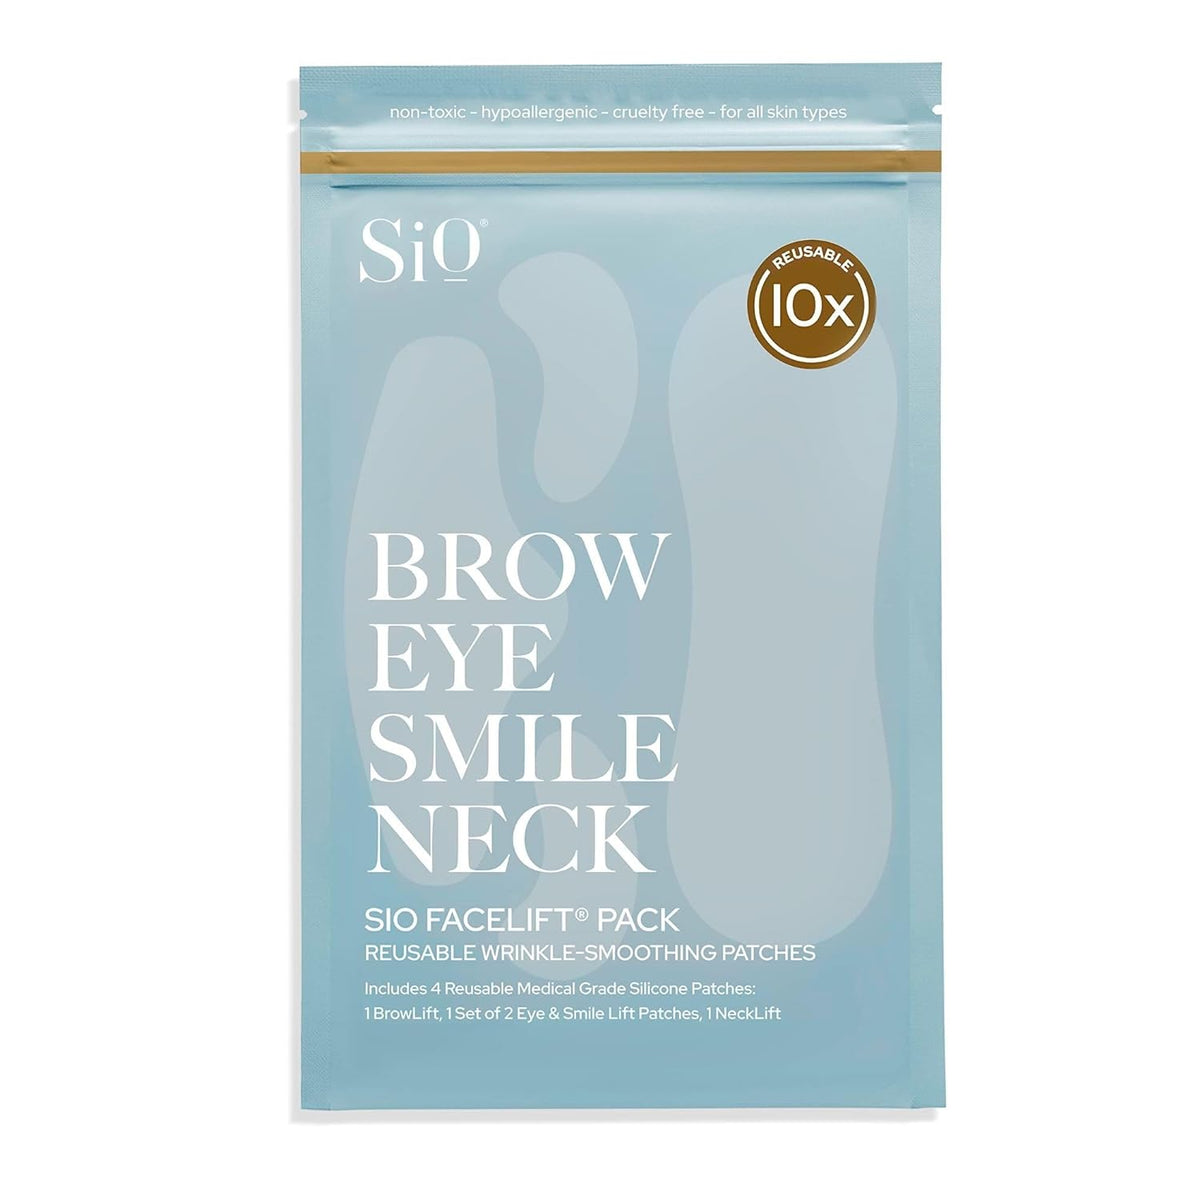 Brow Eye Smile Neck Sio Facelift Pack Reusable Wrinkle Smoothing Patches